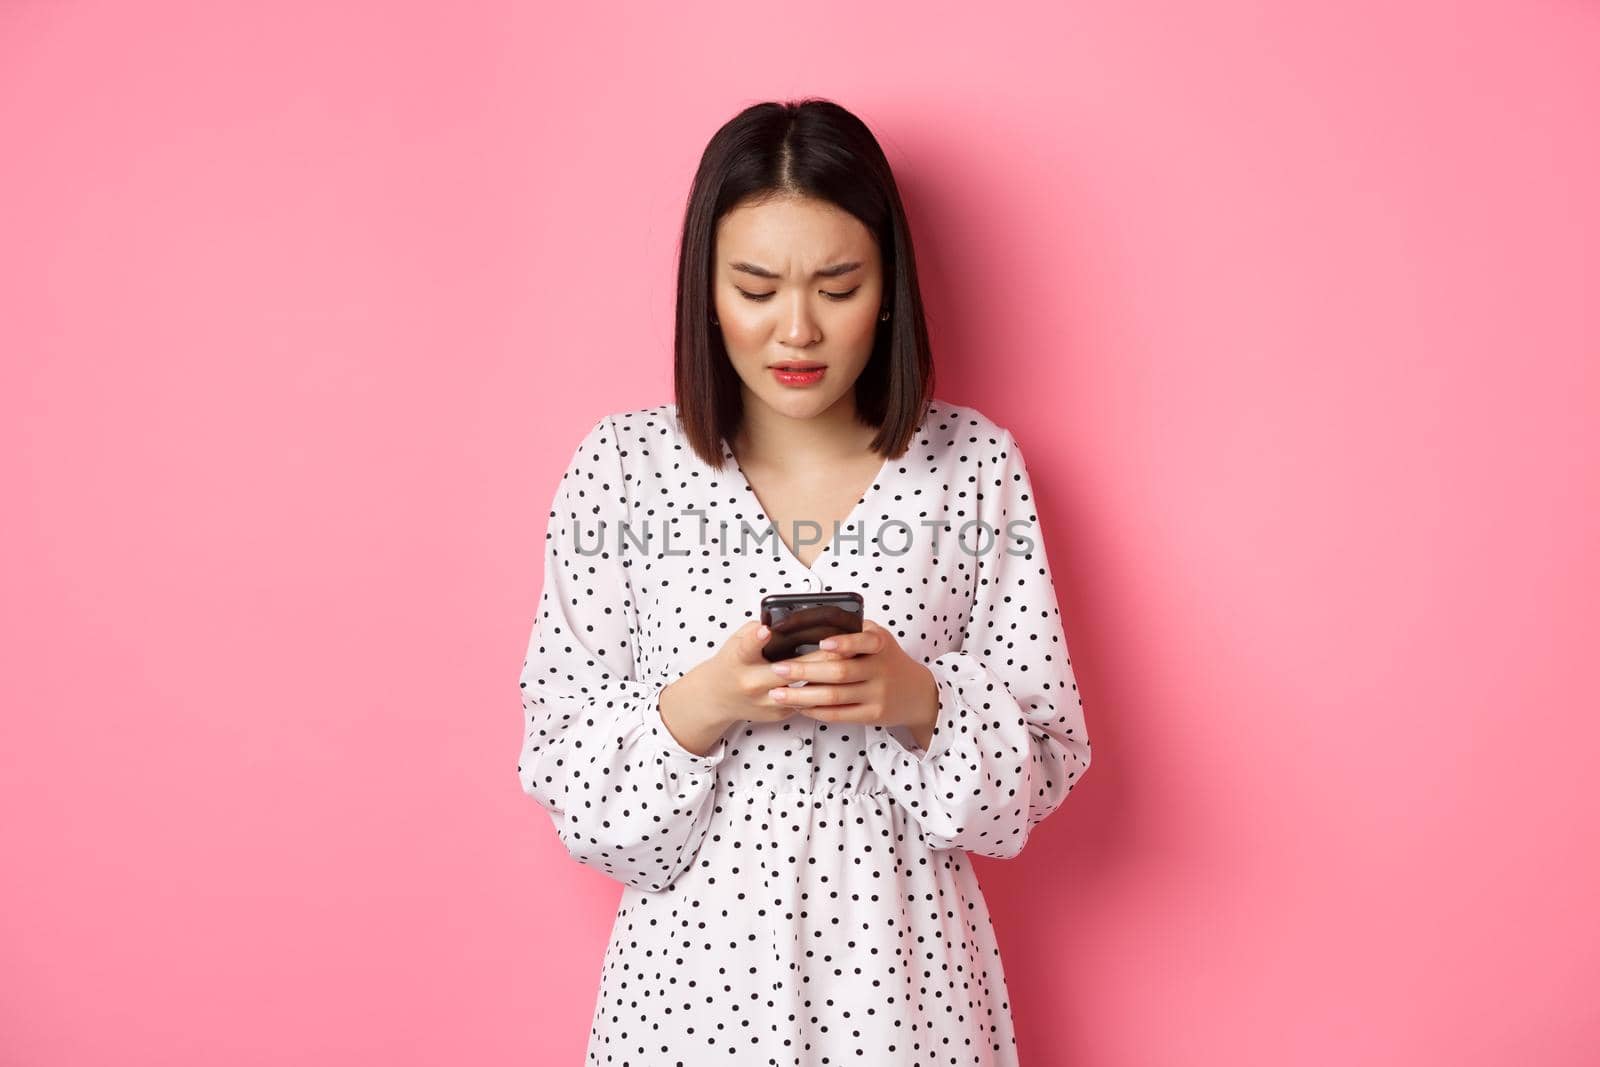 Nervous and concerned asian woman reading message on smartphone, looking worried, standing in dress over pink background.